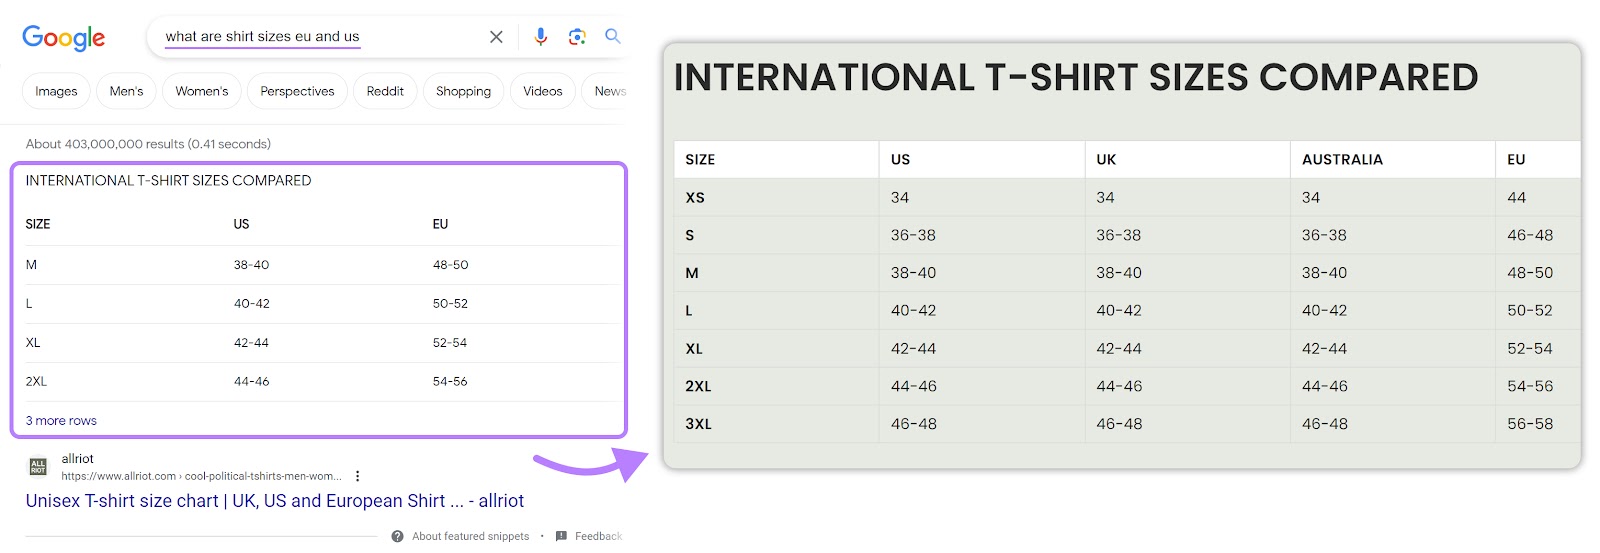 A featured snippet table (left) and a table from a website (right) shown for “what are shirt sizes eu and us” query